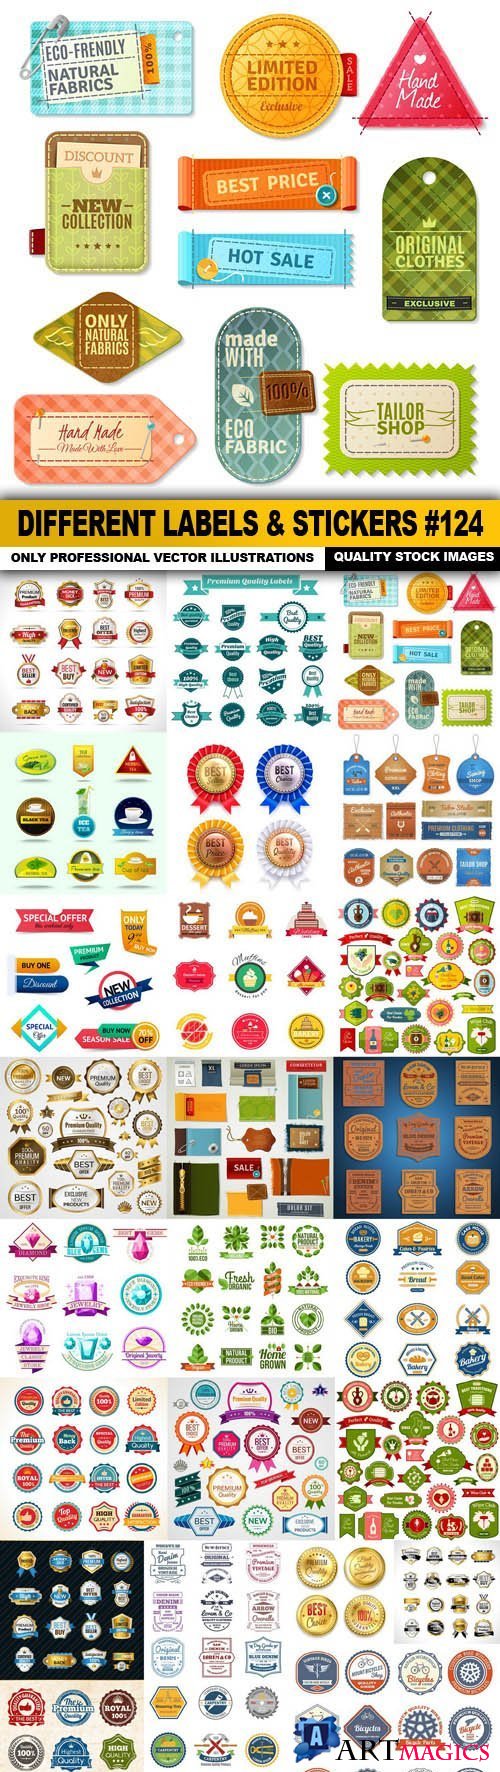 Different Labels & Stickers #124 - 25 Vector